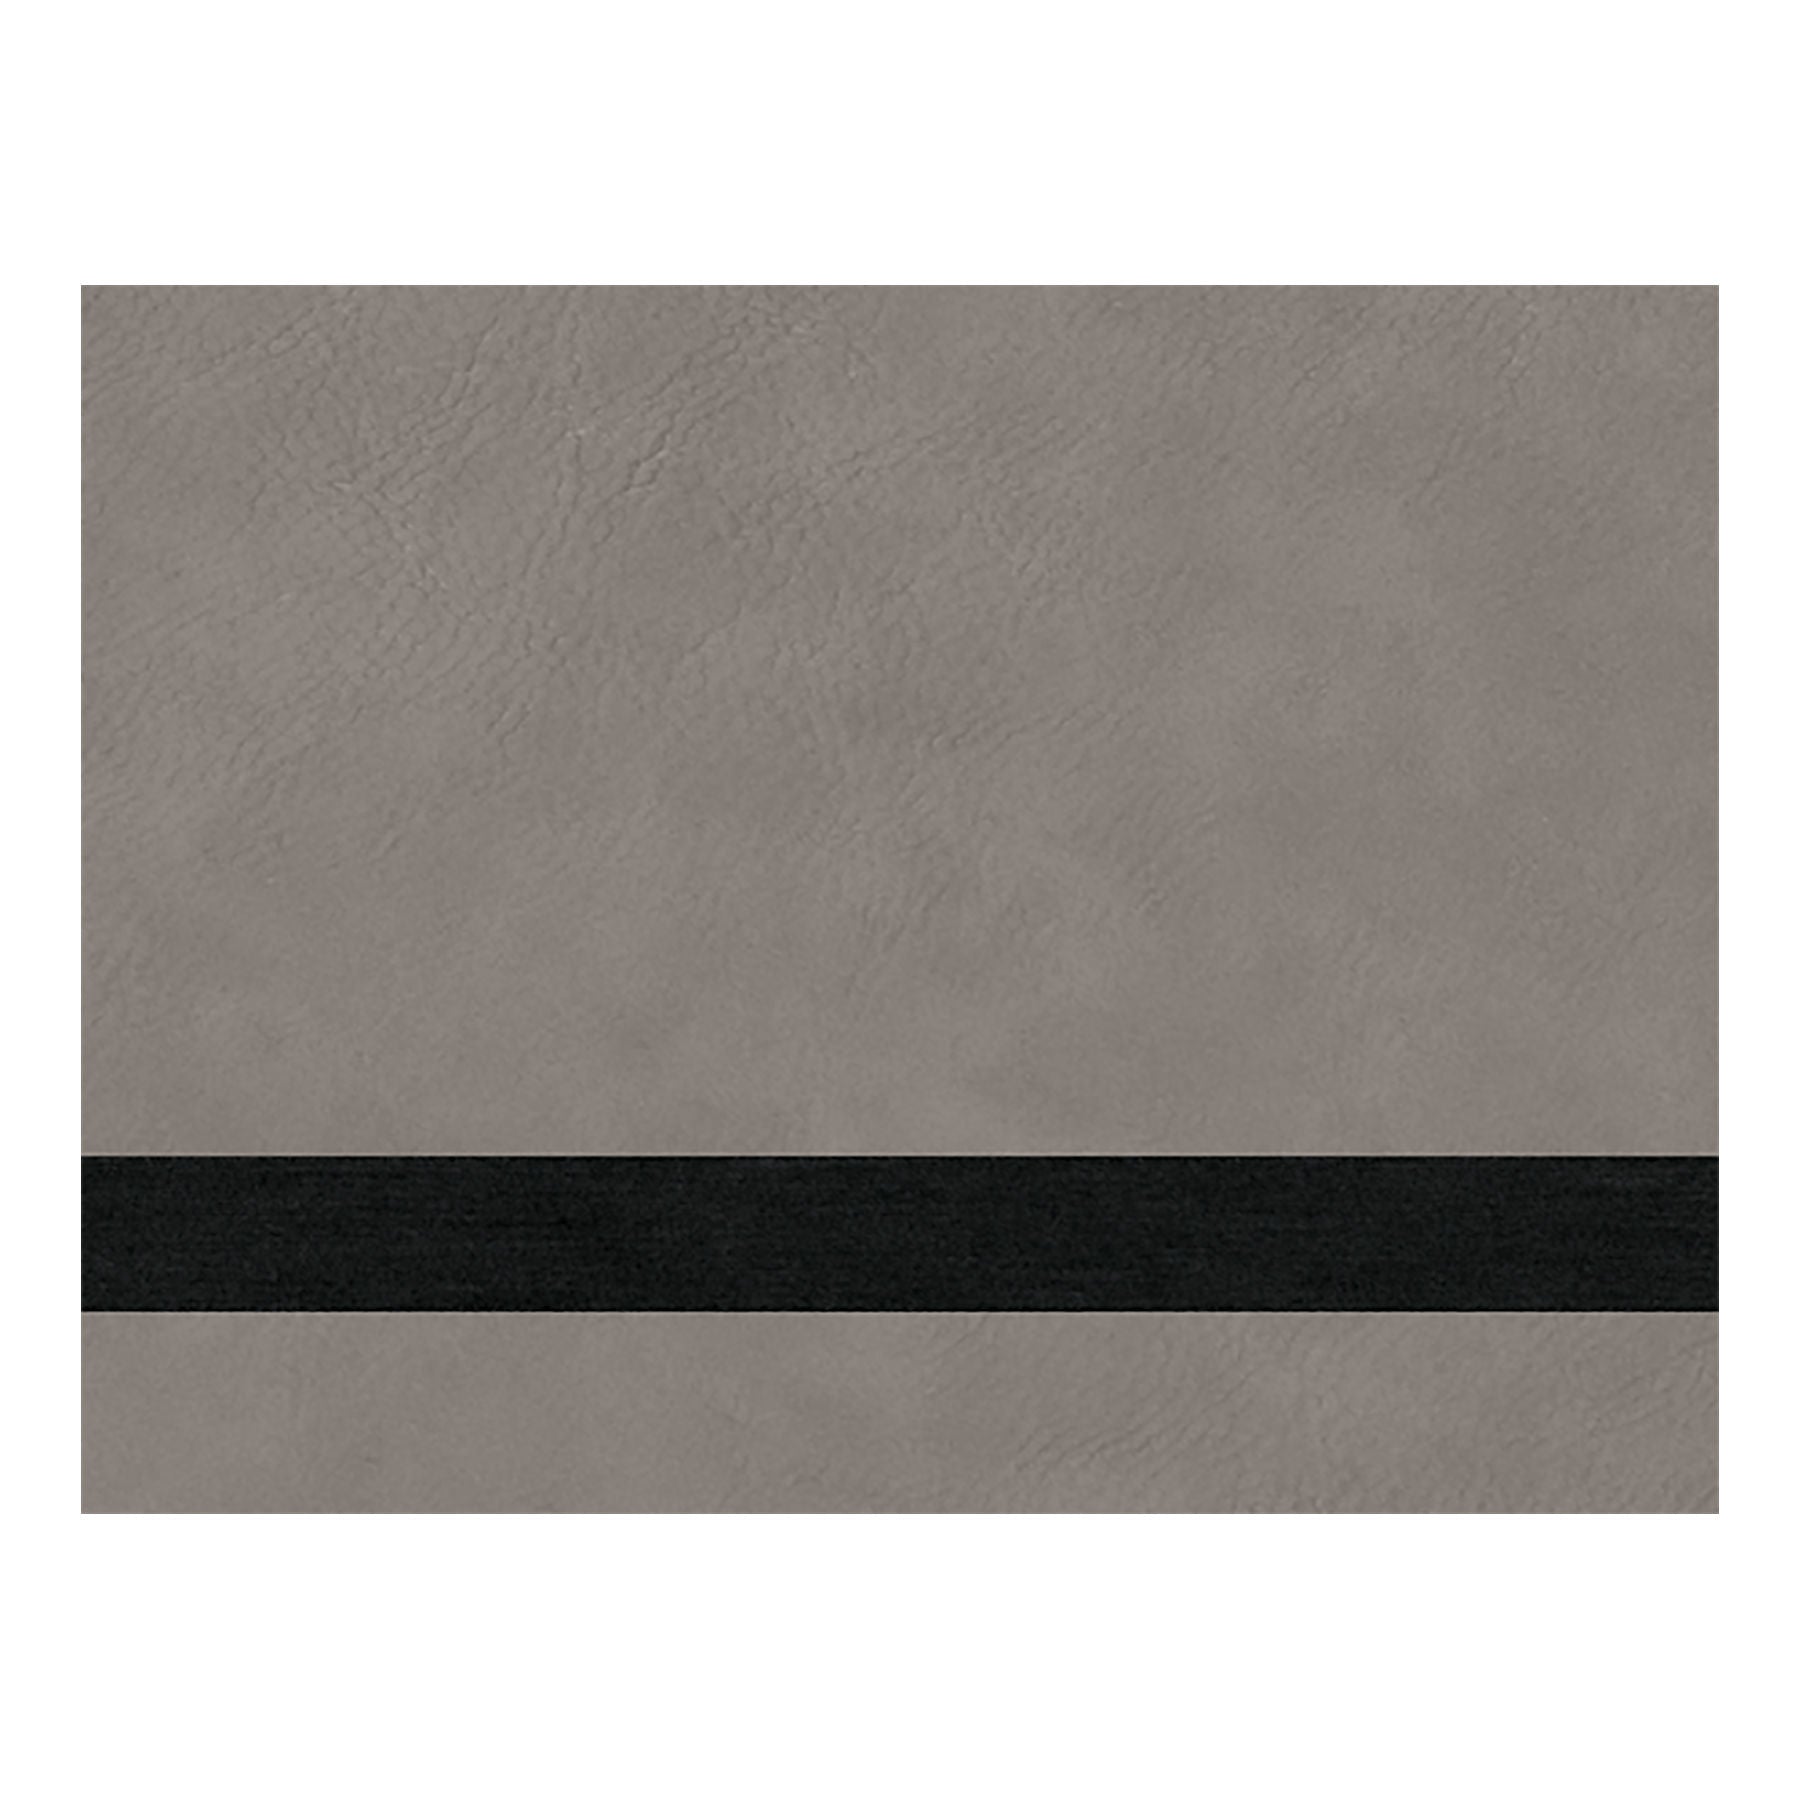 Leatherette Sheet With Iron-on Adhesive 12 in x 18 in – CraftedSupplies